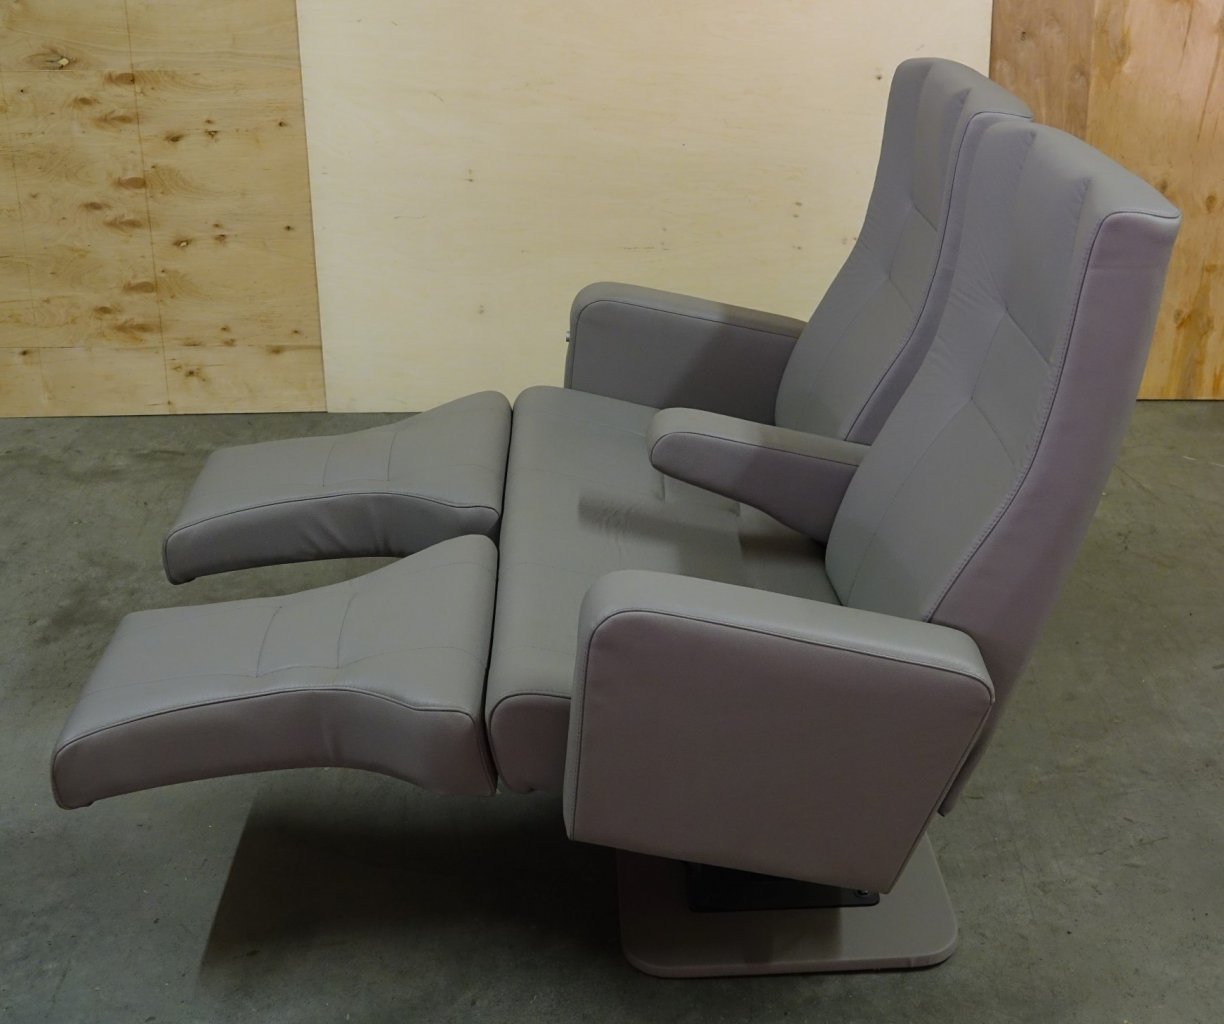 ES004 - LUX RELAX double-seat - 37